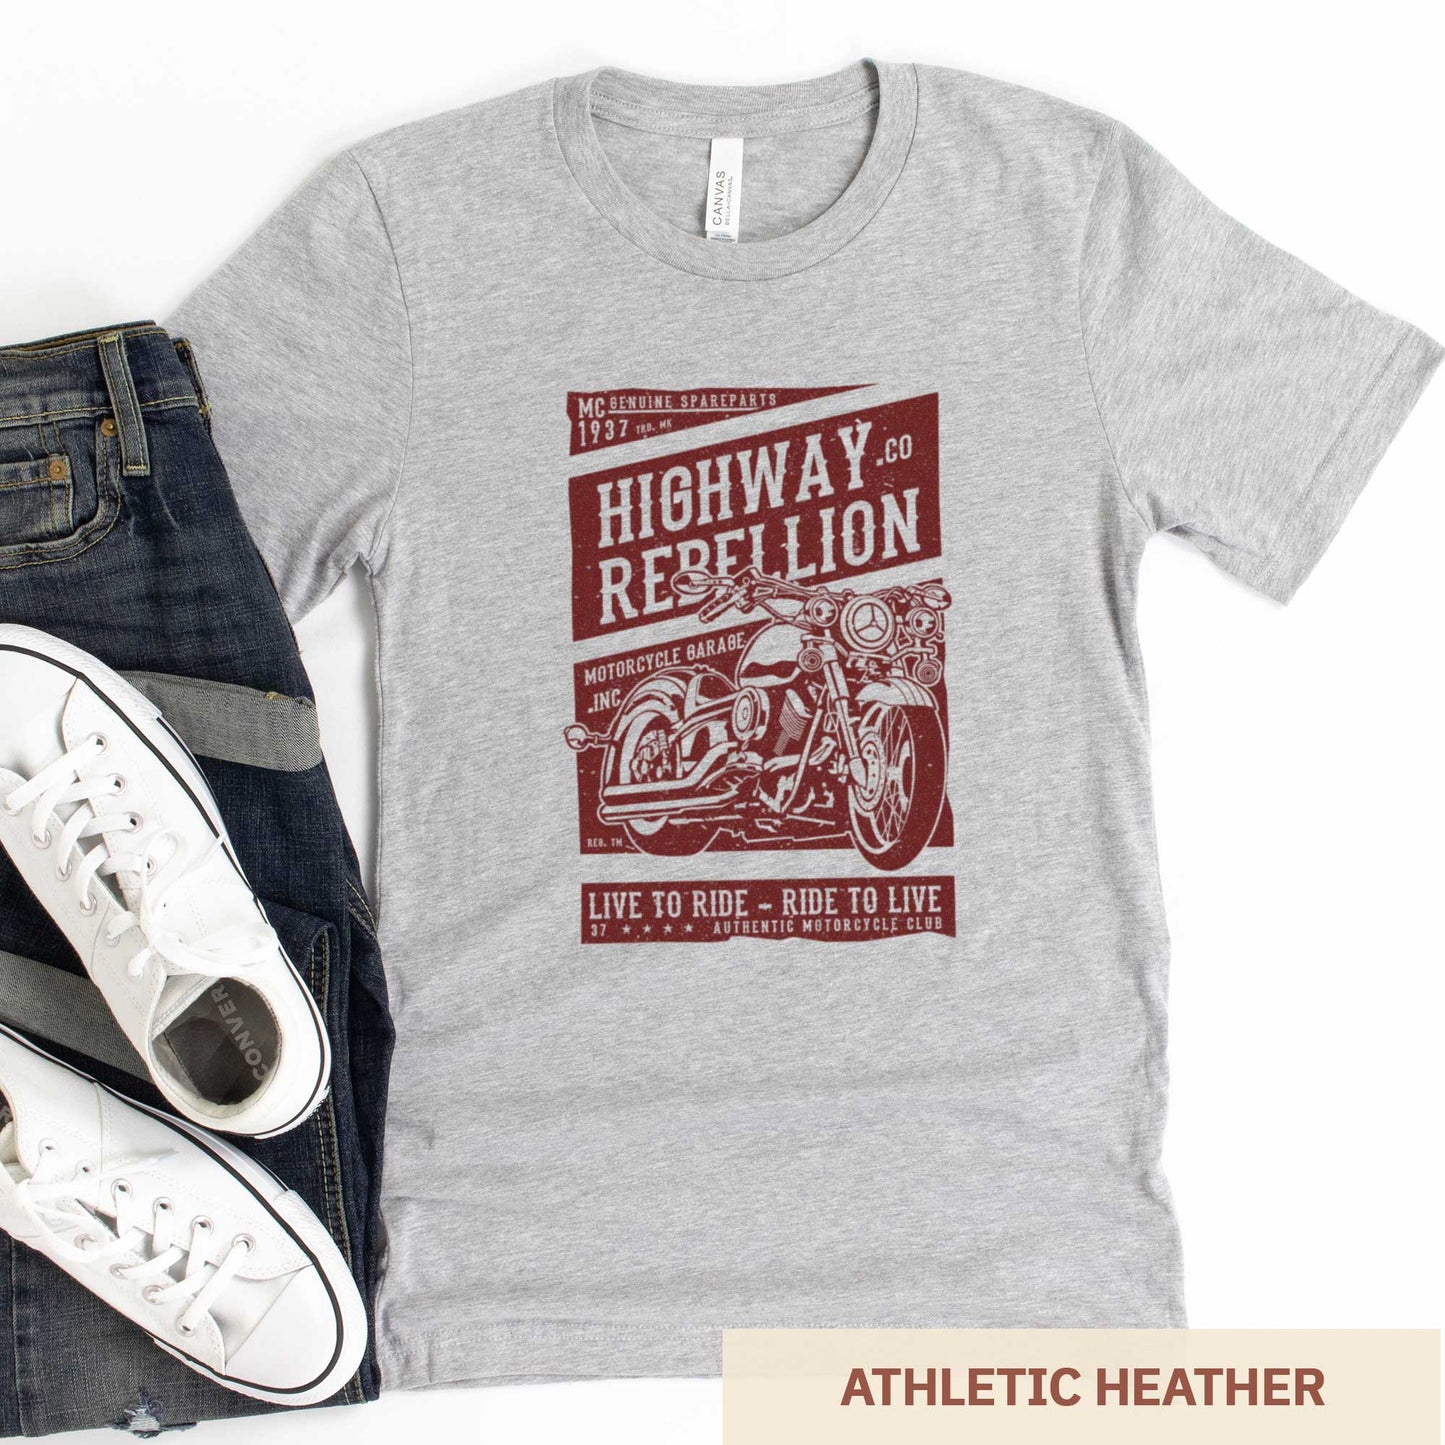 An athletic heather grey Bella Canvas t-shirt featuring a motorcycle and the words highway rebellion live to ride - ride to live.